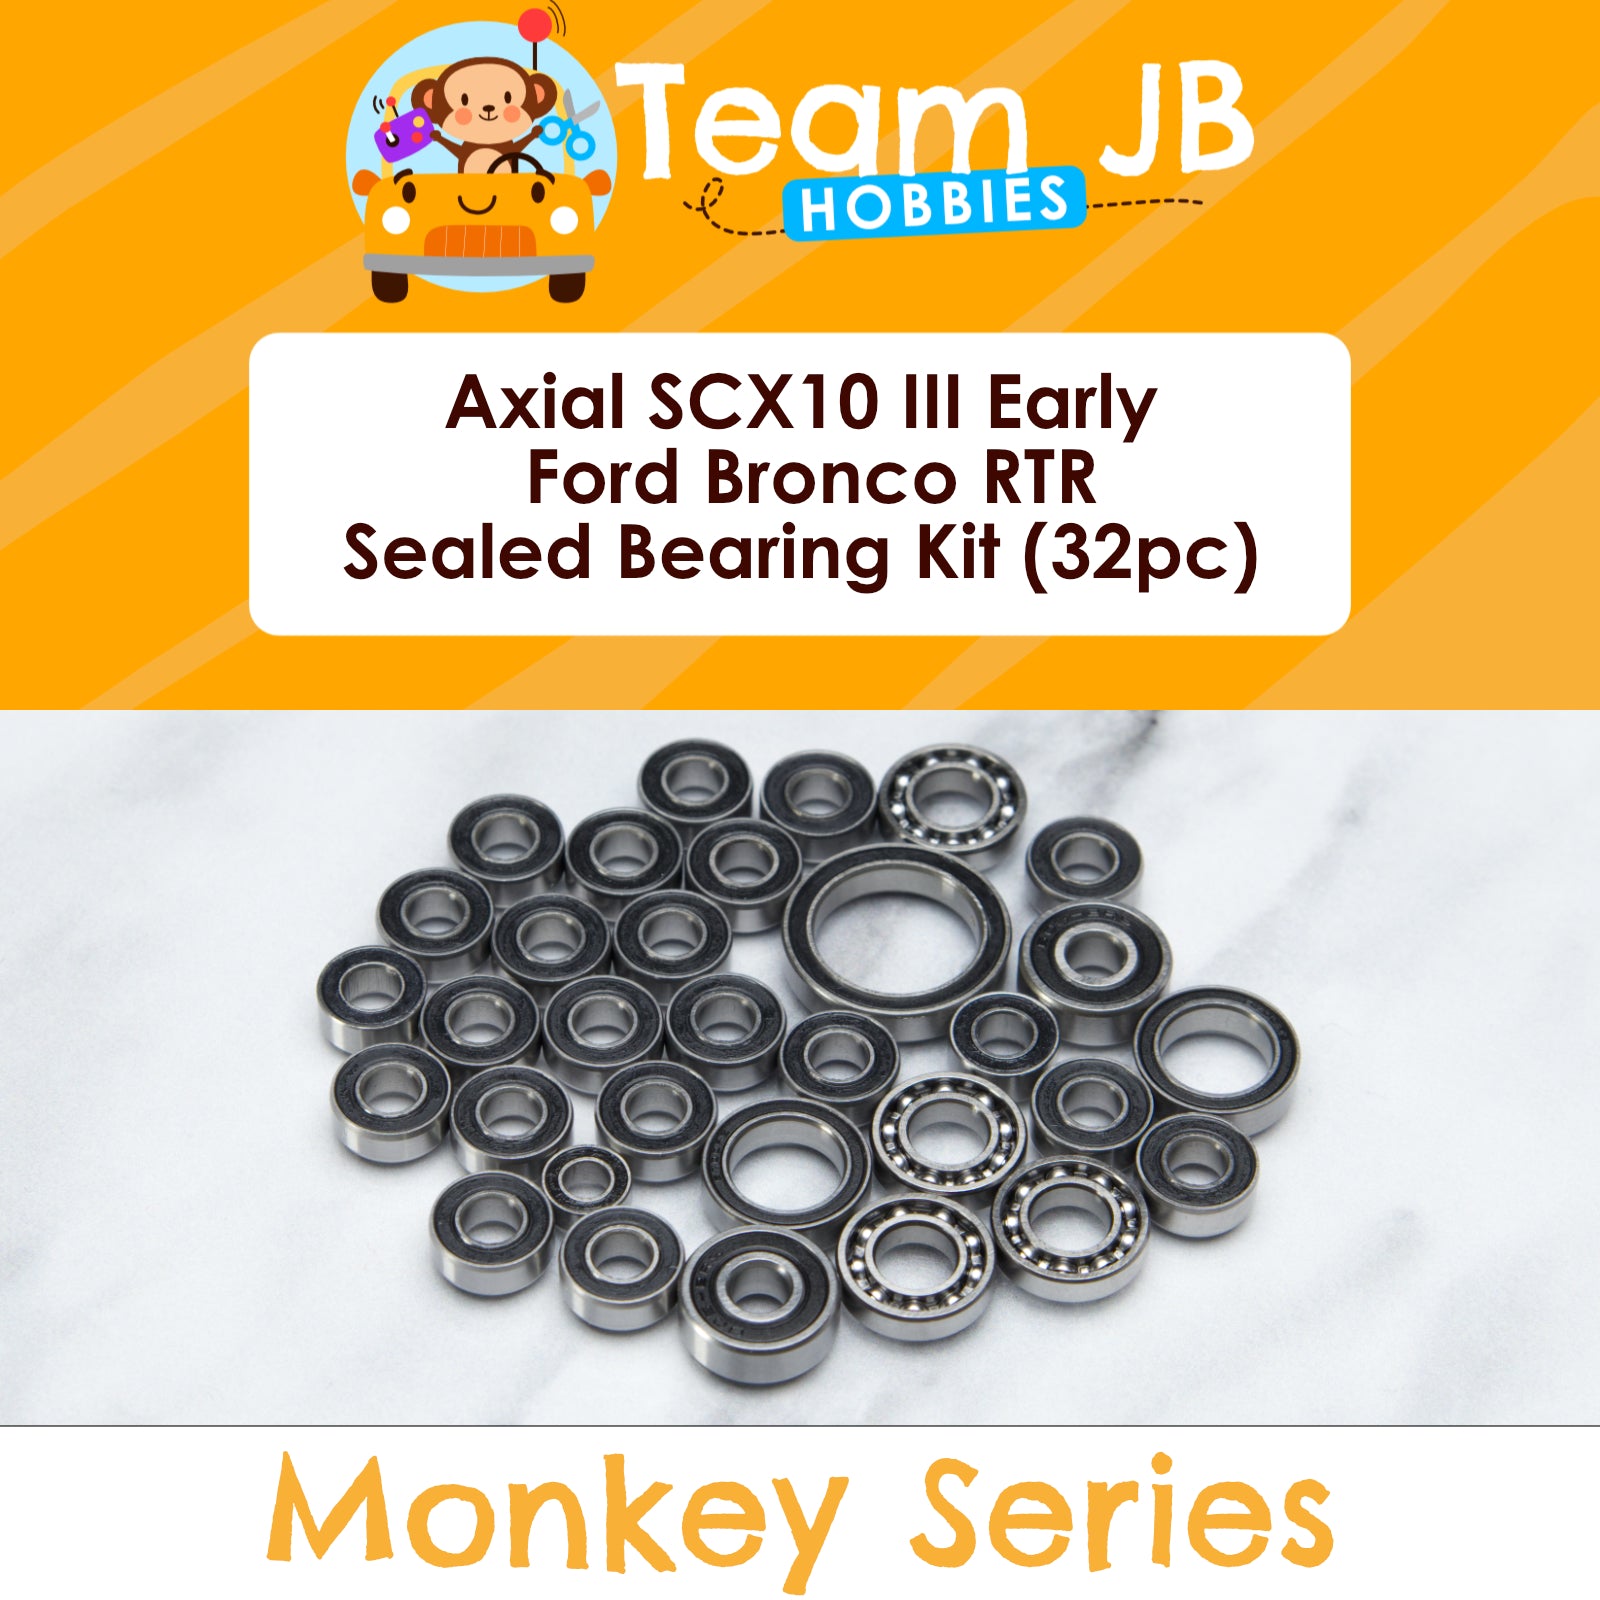 Axial SCX10 III Early Ford Bronco RTR - Sealed Bearing Kit